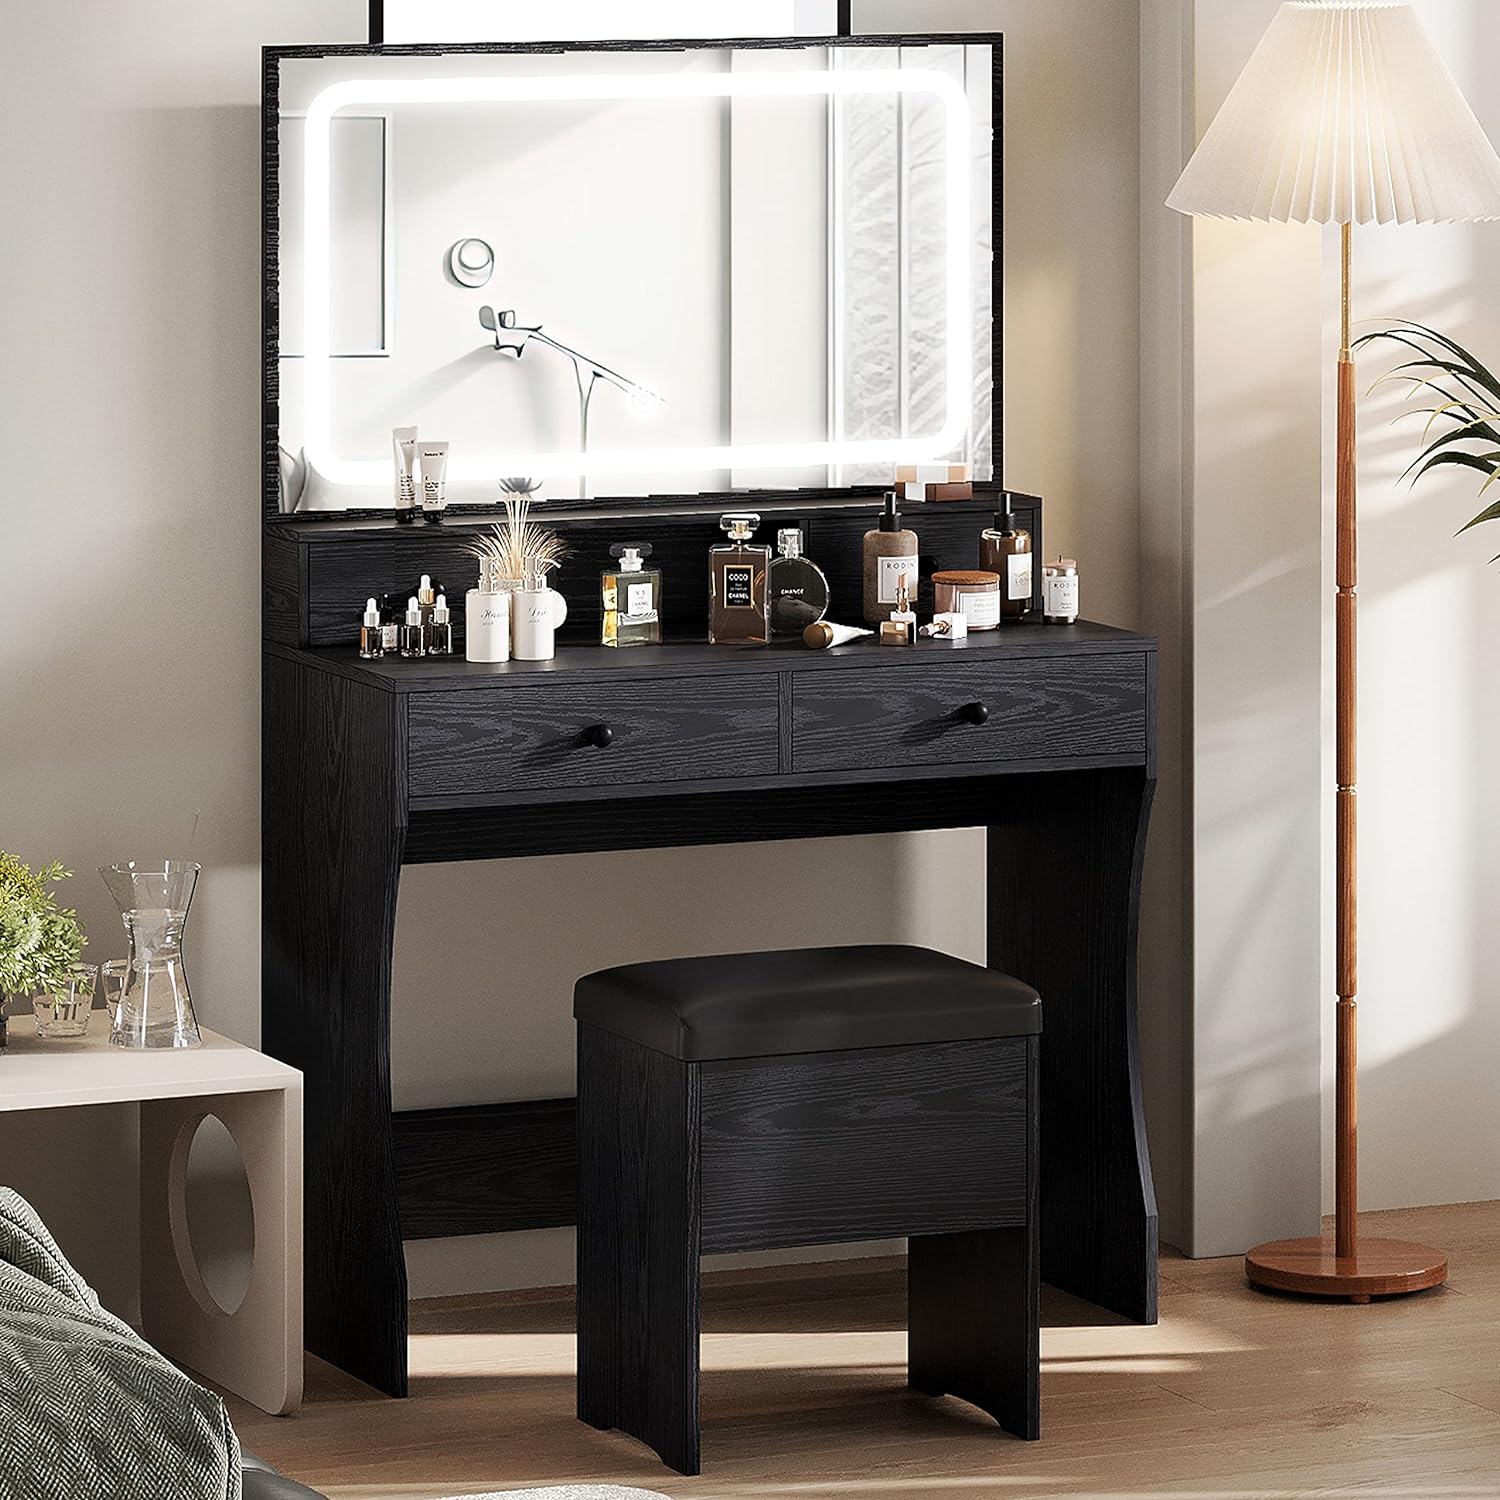 IRONCK Vanity Desk Set with LED Lighted Mirror & Power Outlet, Makeup Vanity Table with 4 Drawers,Storage Bench,for Bedroom, Bathroom, Black